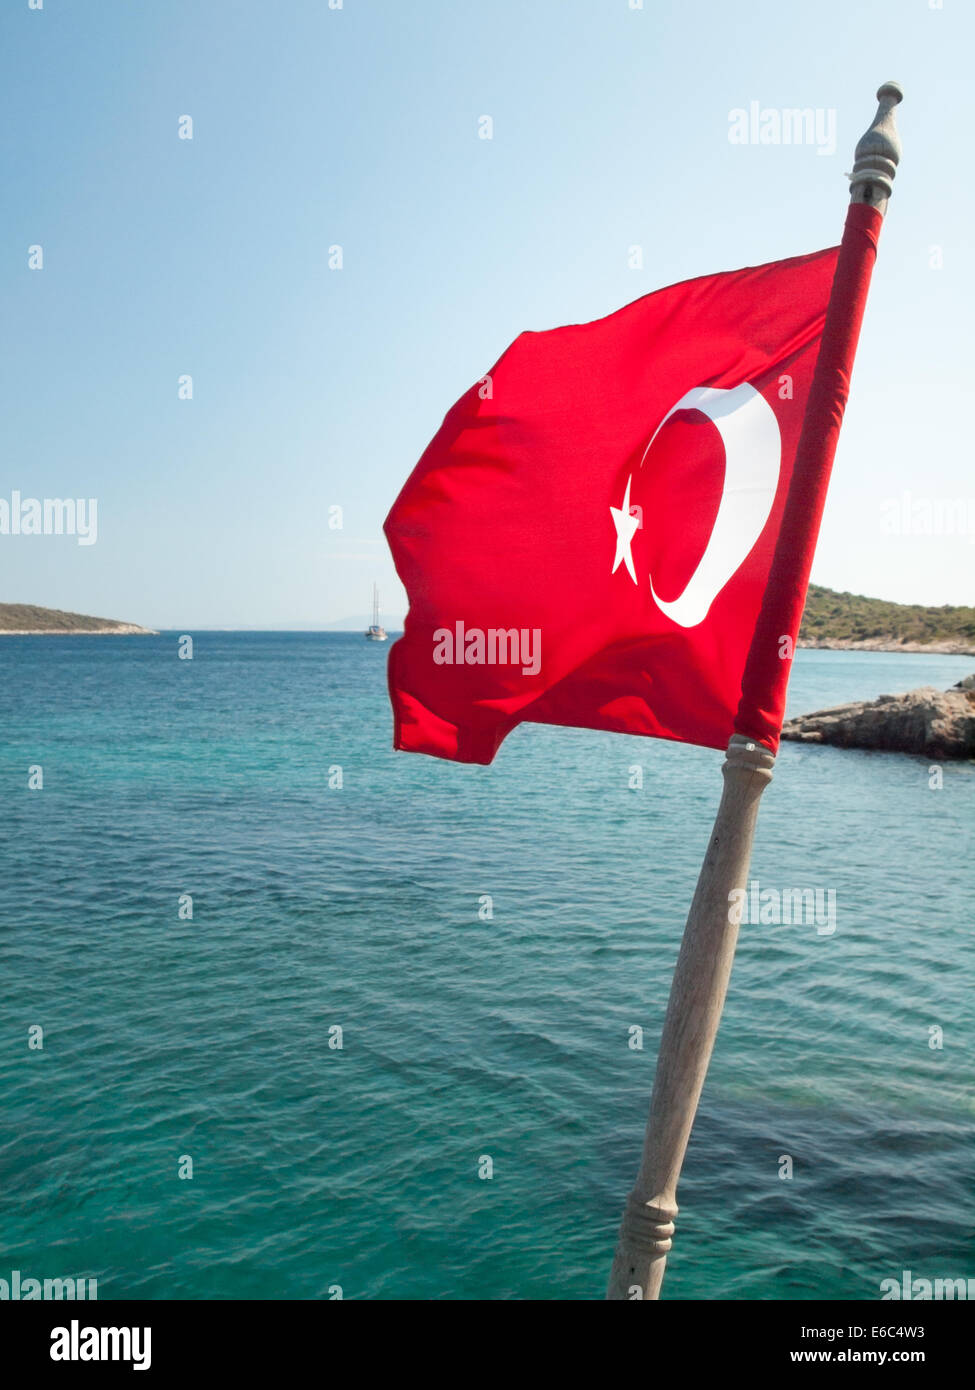 turkish flag on a hardwood mast flying in a strong wind with rocky coastline blue sea and boat behind Stock Photo